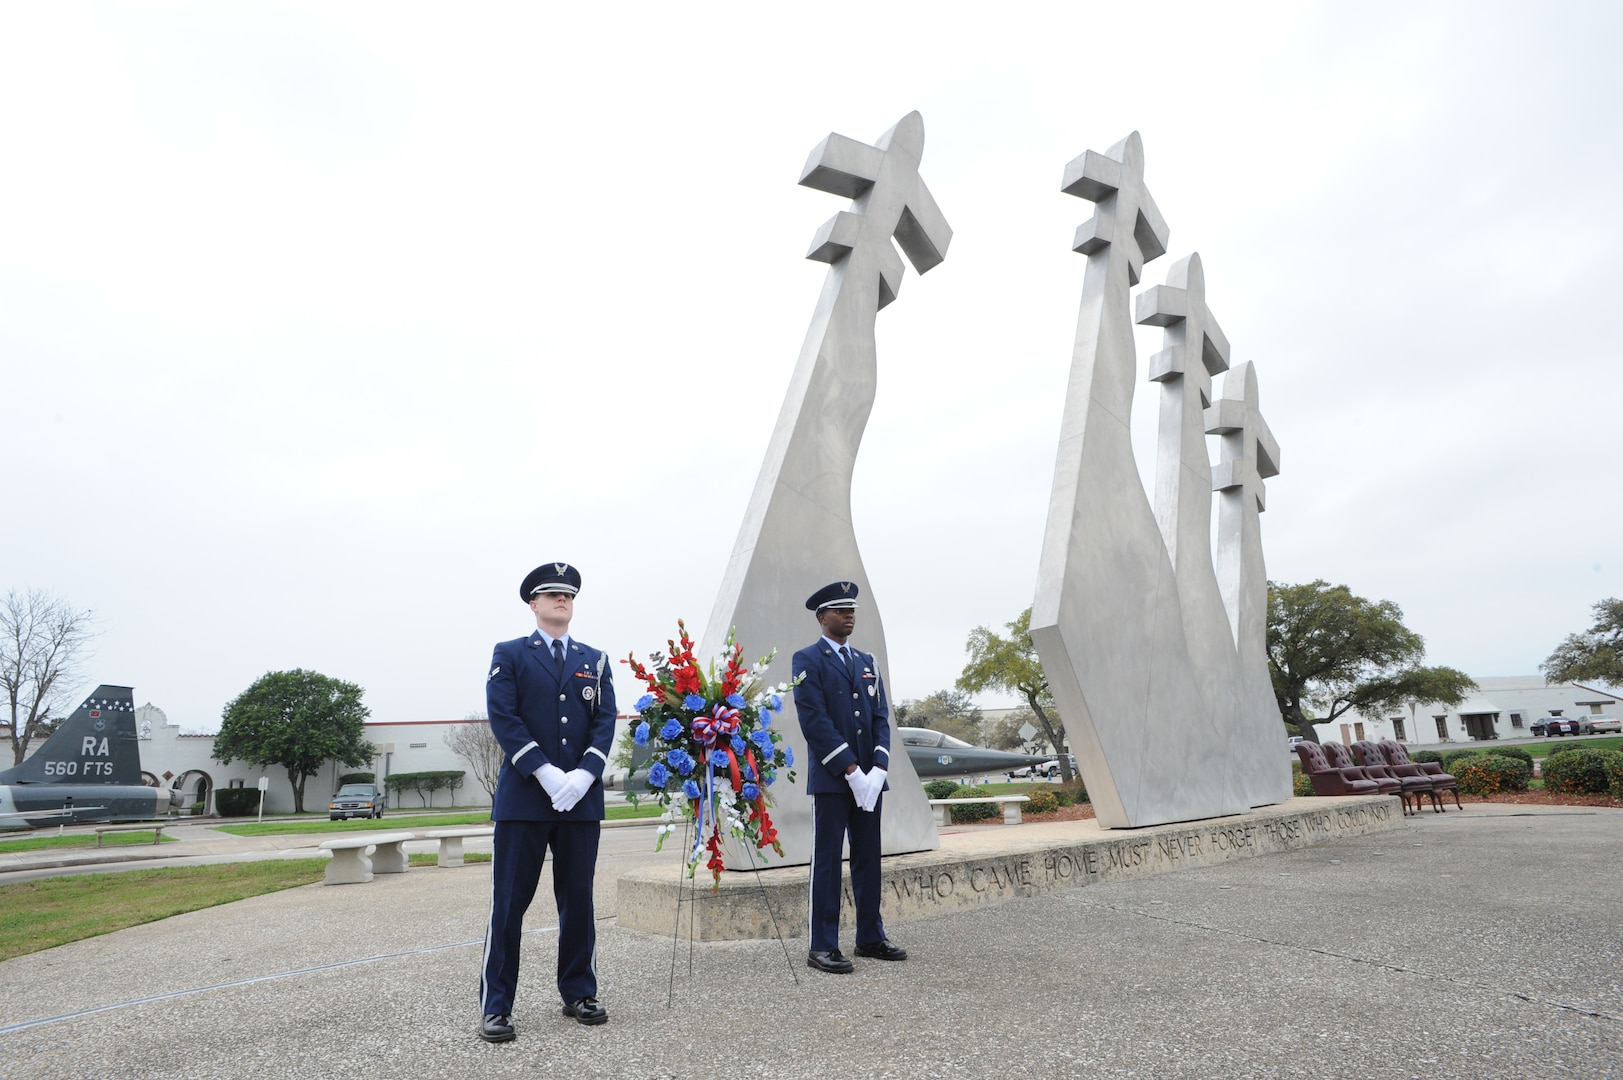 Airman 1st Class Hayden Tondee (left) and Senior Airman Willie Muhammad (right), Joint Base San Antonio Honor Guard members, stand at the Missing Man Memorial before the  wreath laying ceremony, which was held in conjunction with the 42nd Freedom Flyer Reunion March 20 at JBSA-Randolph.